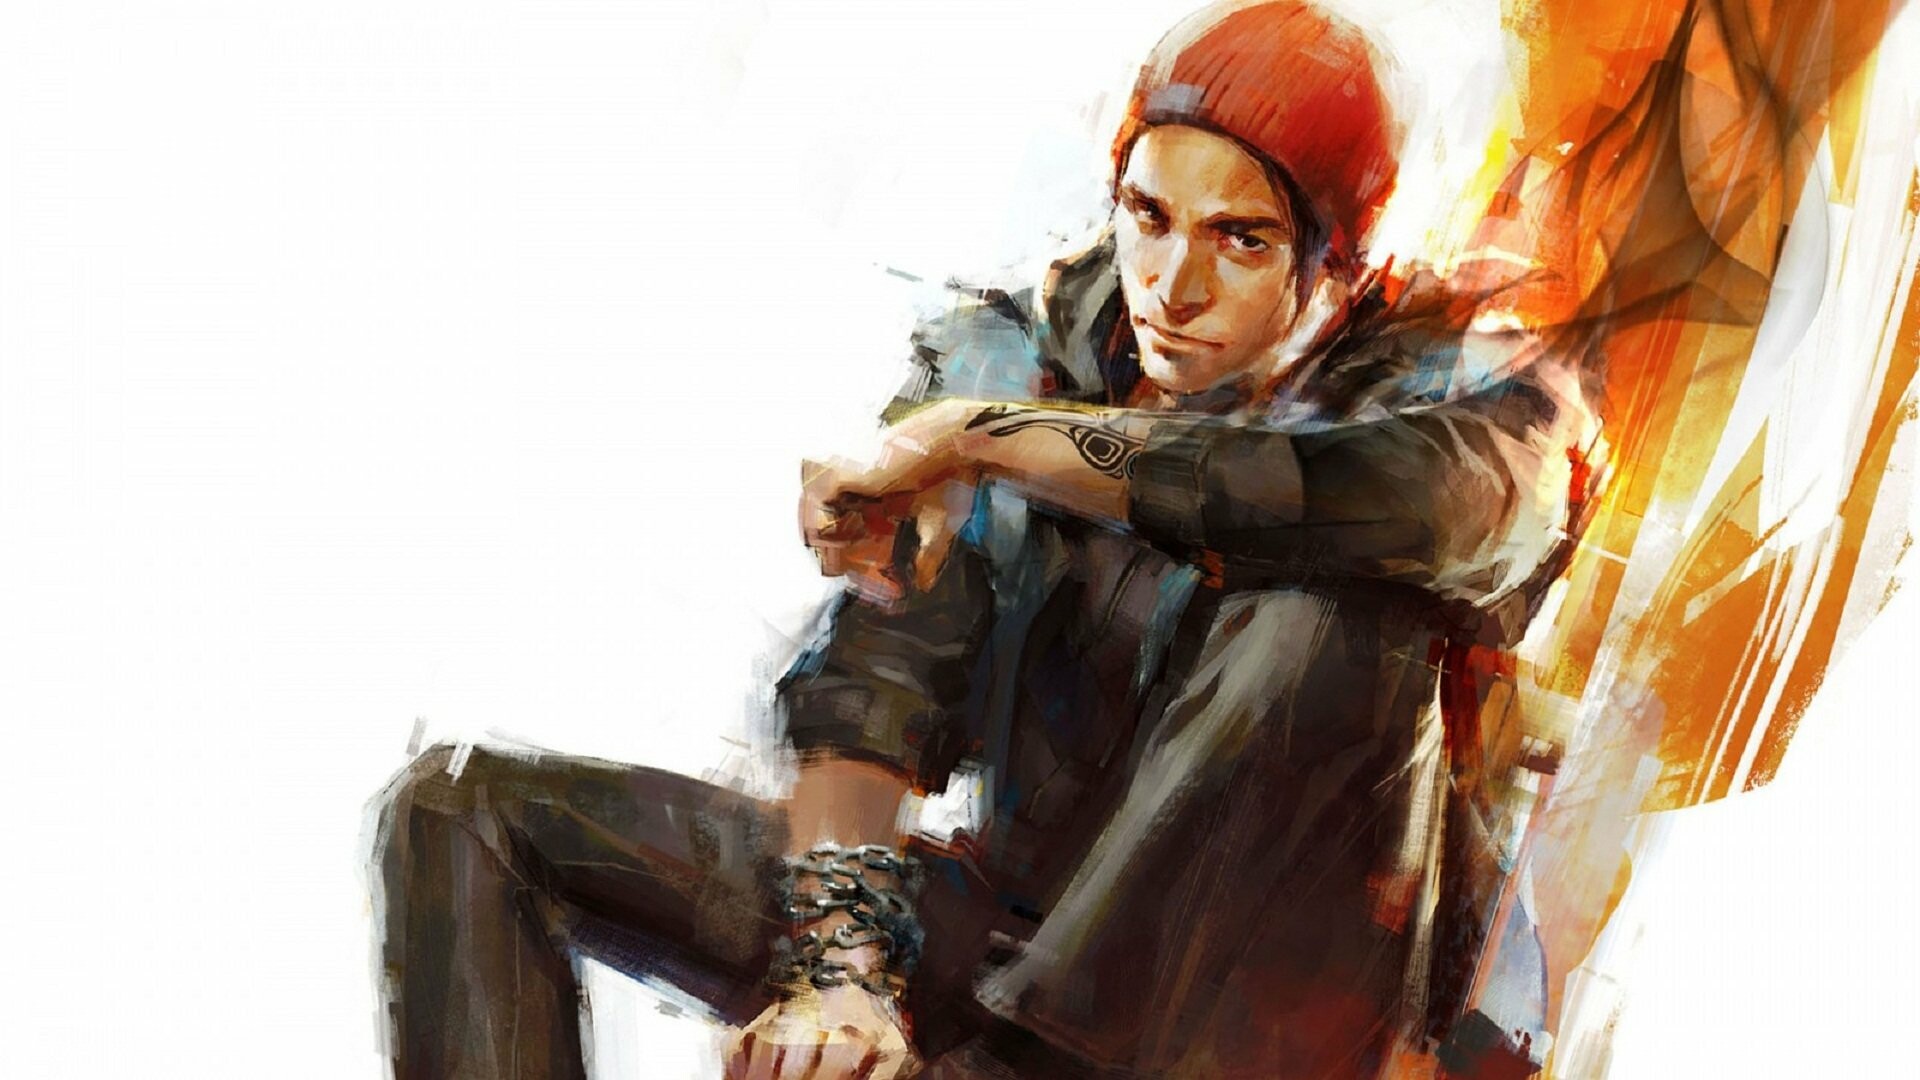 inFAMOUS: Delsin Rowe, a 24-year-old graffiti artist and local delinquent of the Akomish reservation. 1920x1080 Full HD Background.